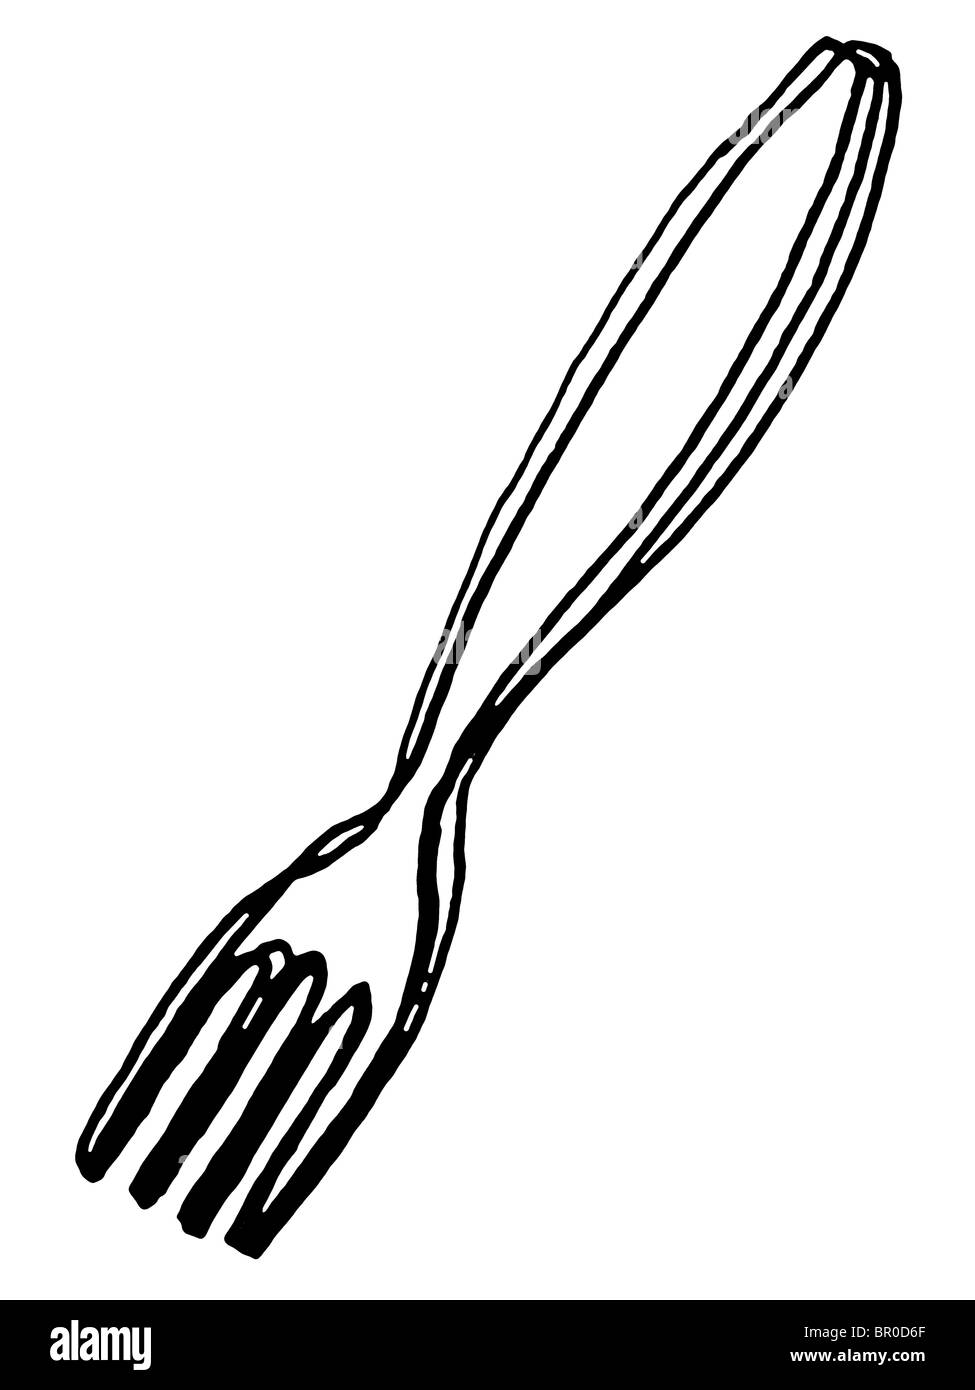 A black and white illustration of a fork Stock Photo